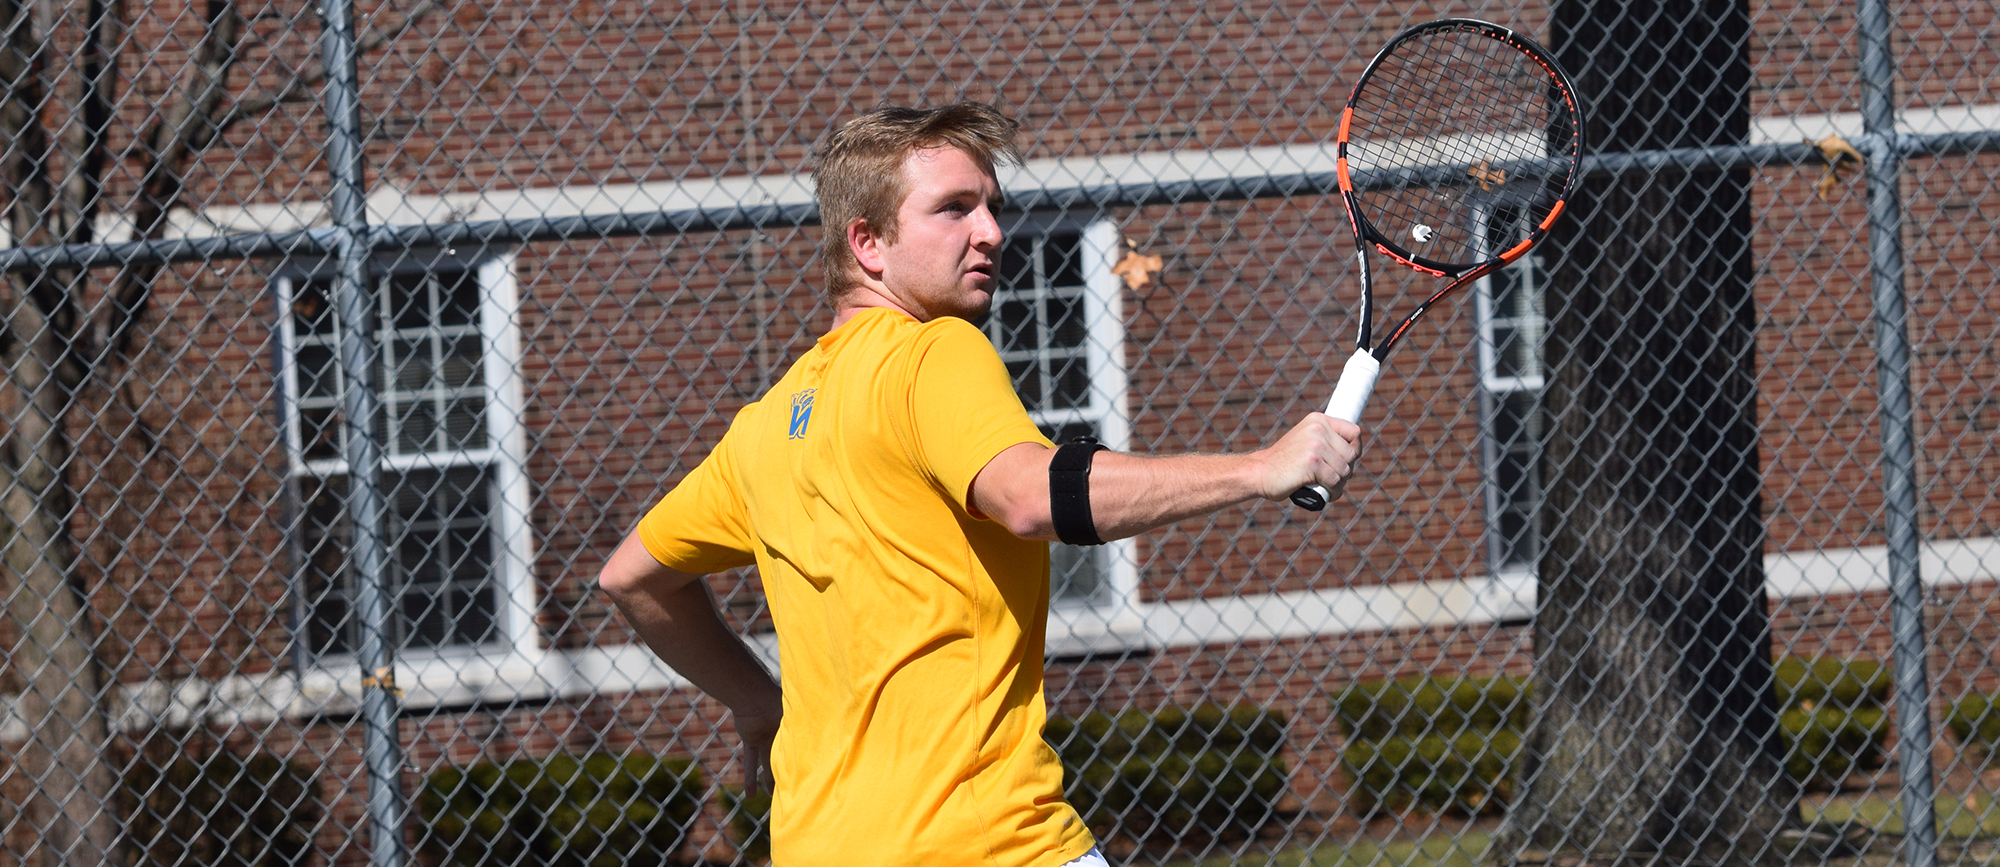 Freshman Max Gordon posted a 6-4, 2-6, 10-8 win at No. 3 singles in Western New England's 7-2 loss at Endicott on Saturday. (Photo by Rachael Margossian)